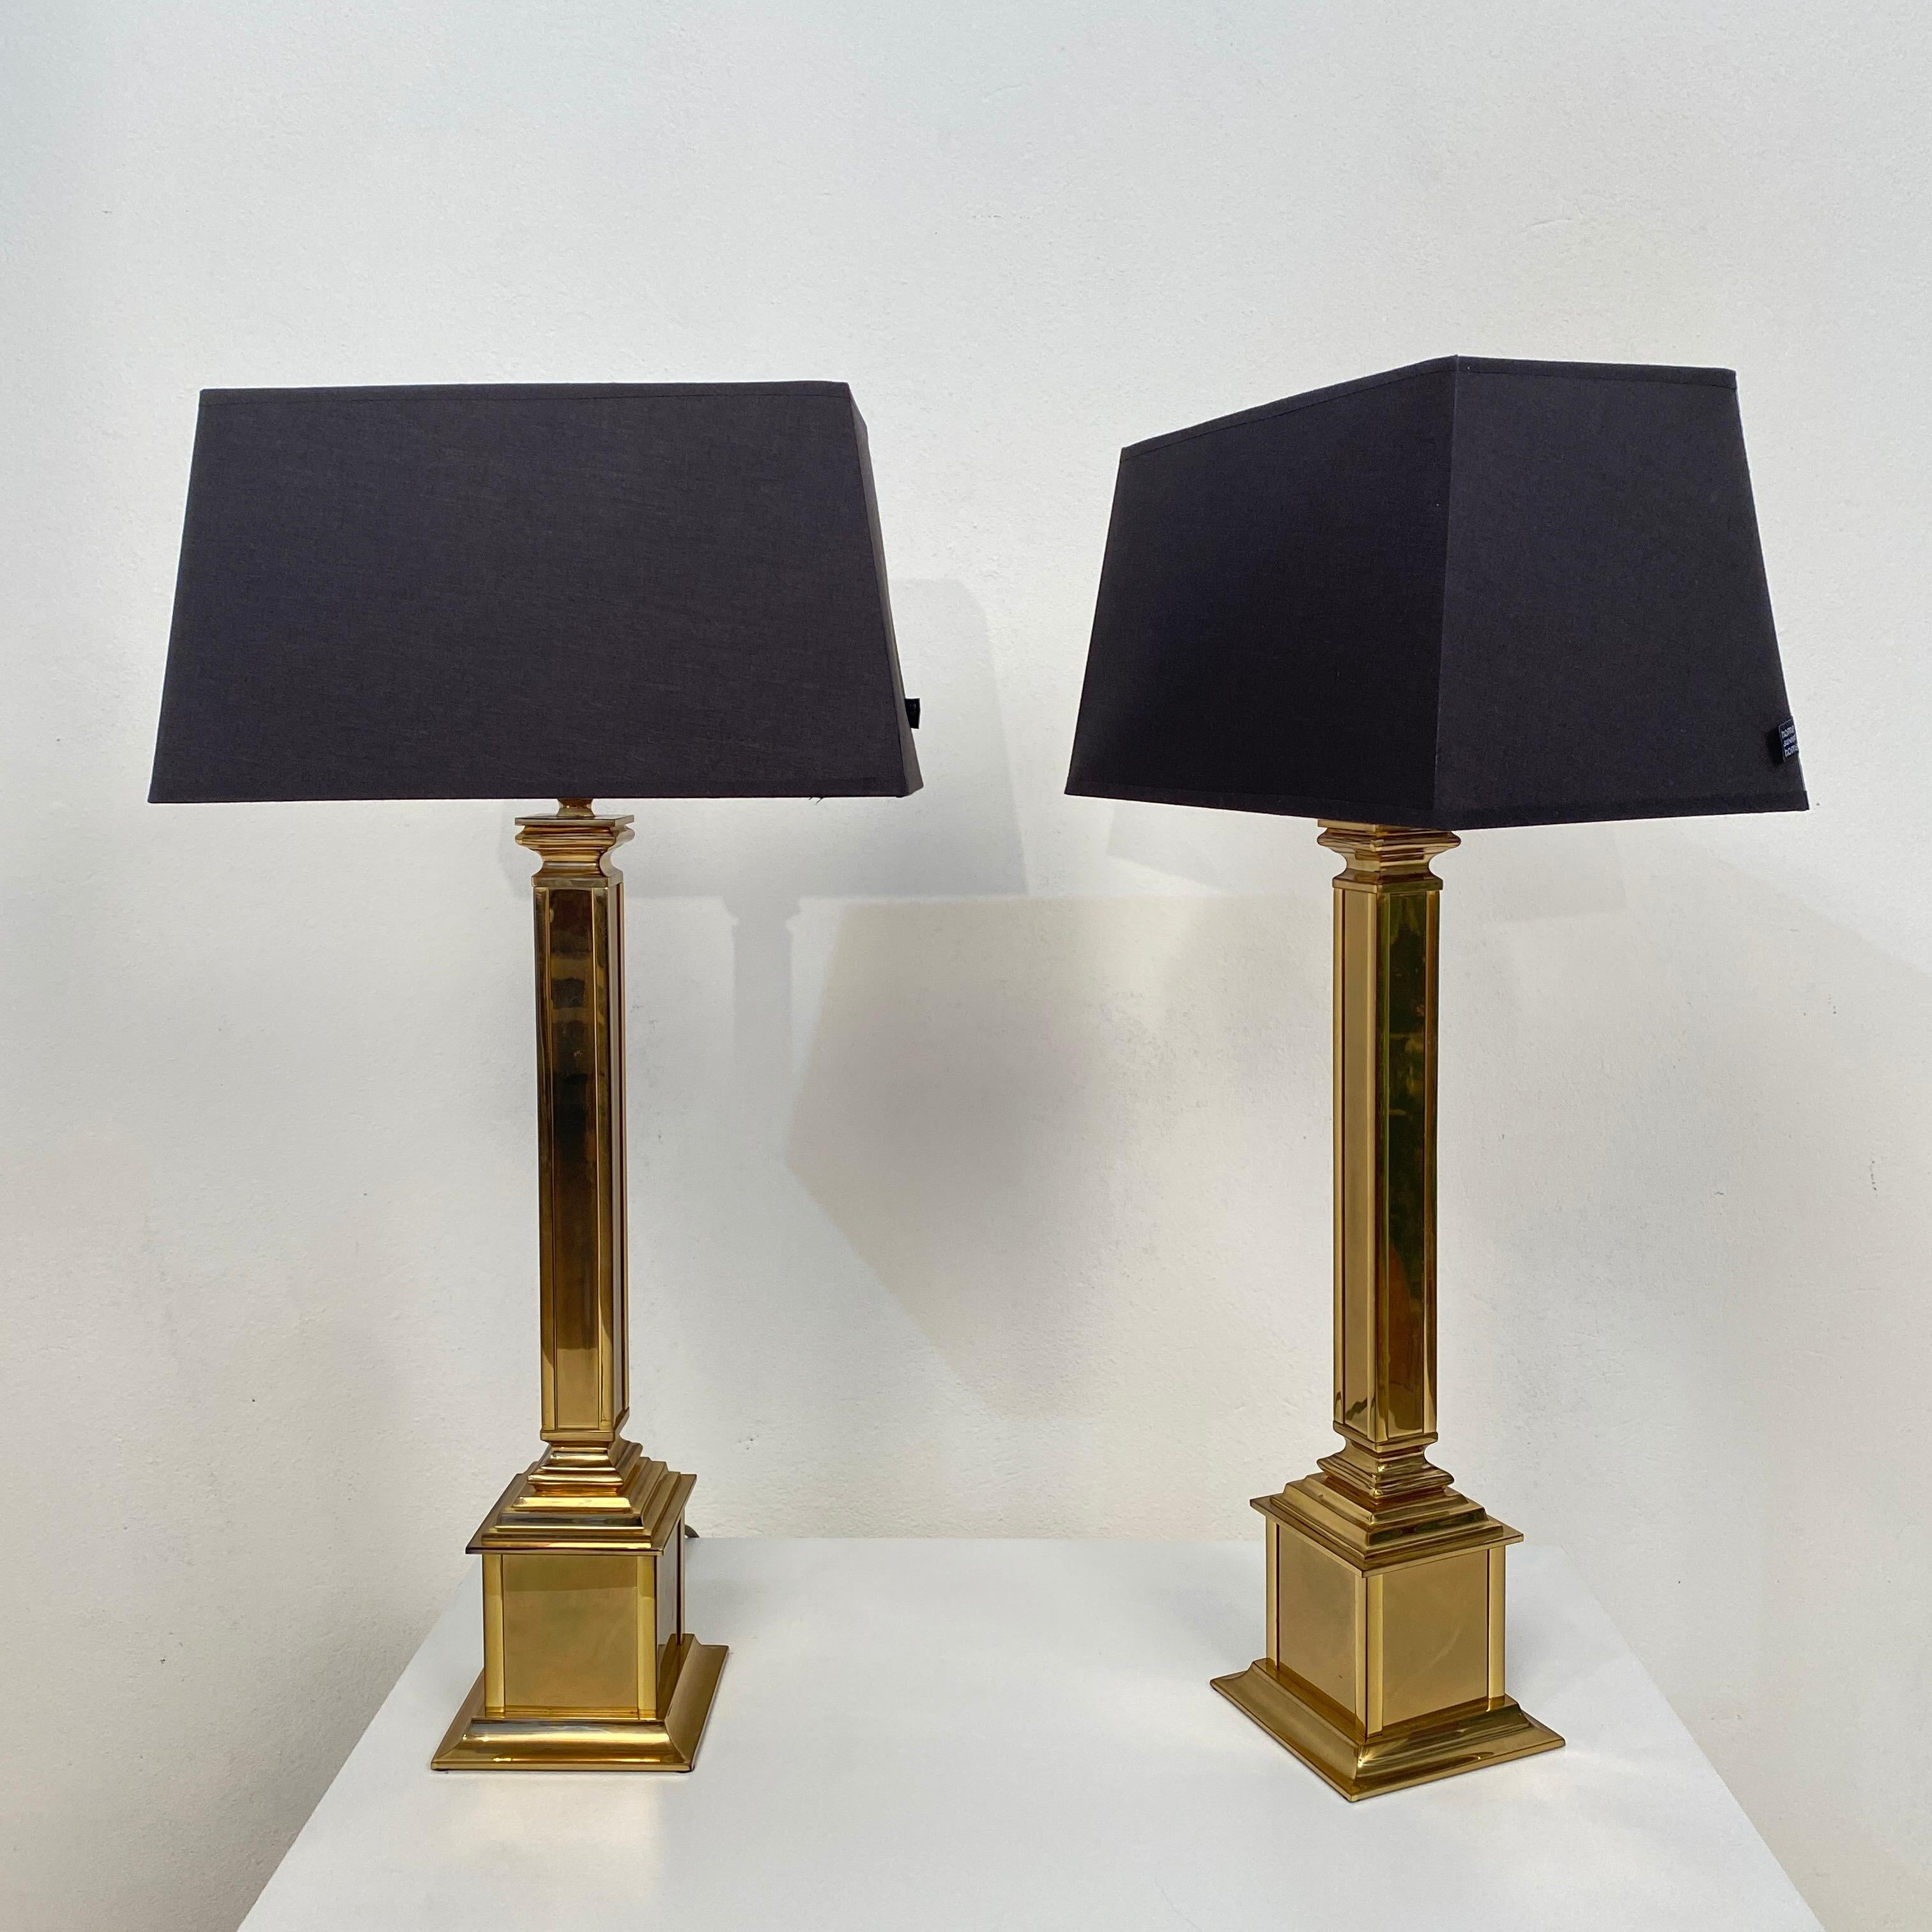 Pair of German Midcentury Gilded Brass Table Lamps with Black Lamp Shades, 1970 1